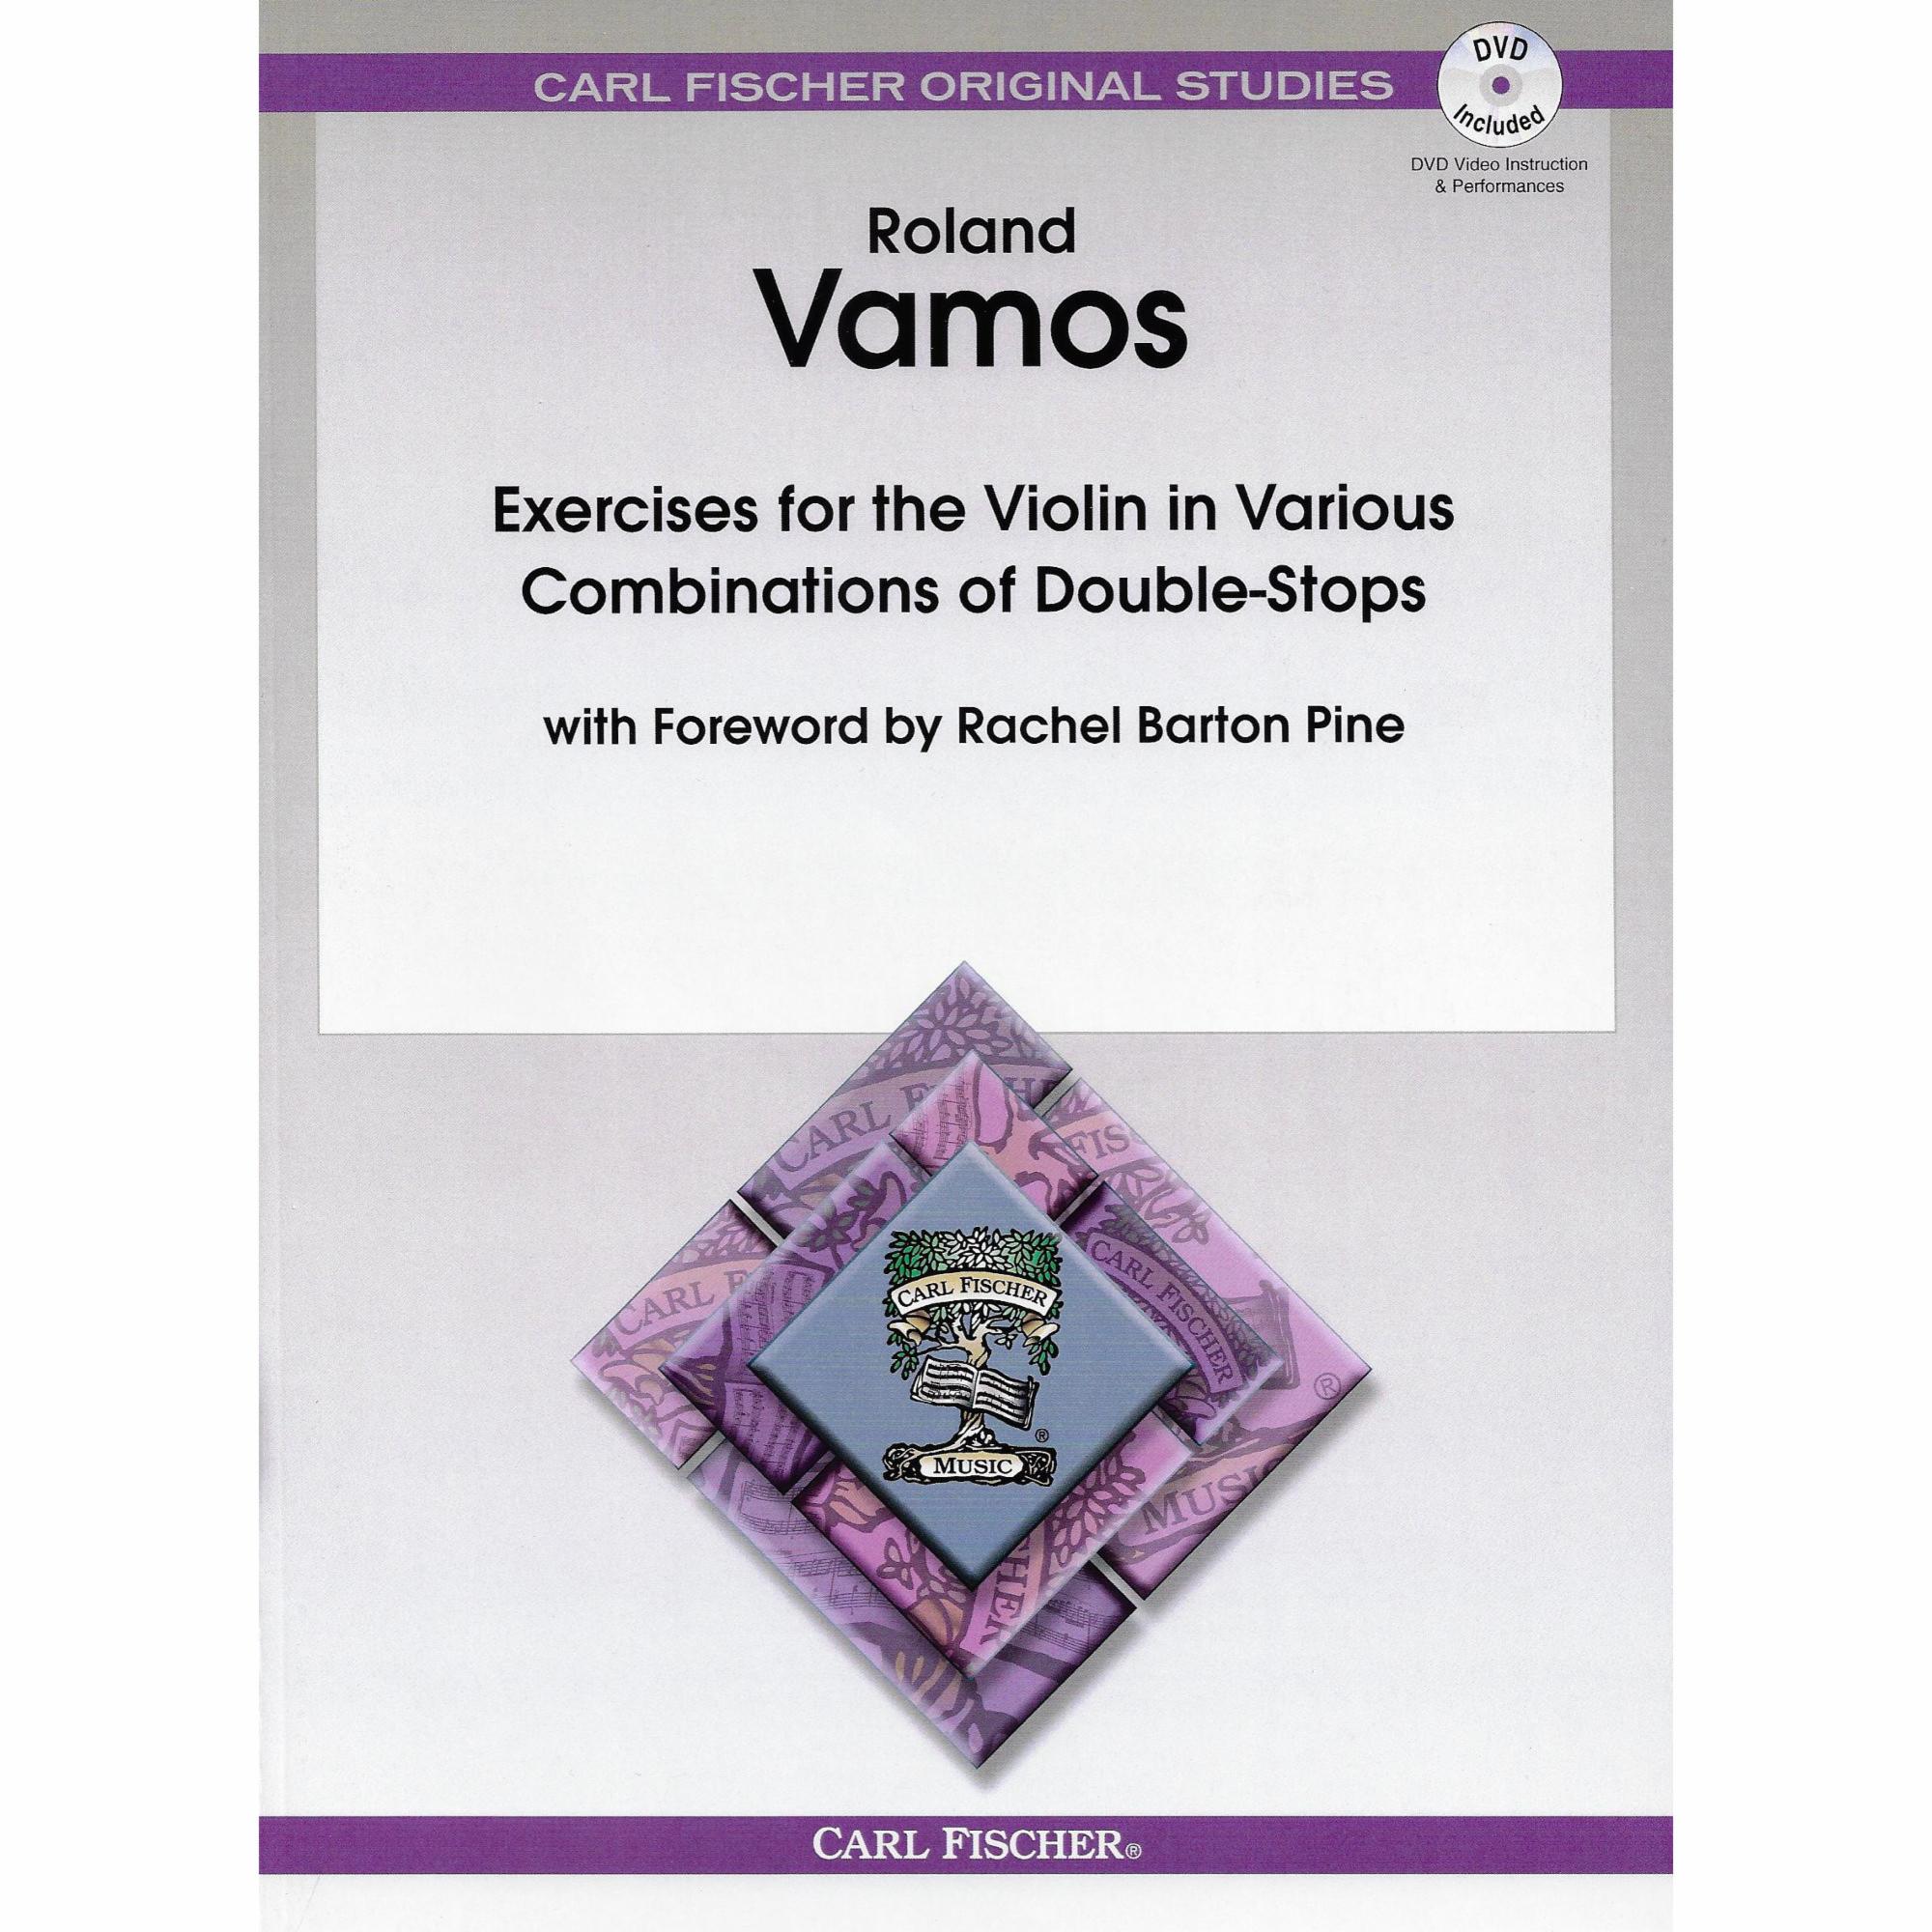 Vamos -- Exercises for the Violin in Various Combinations of Double-Stops